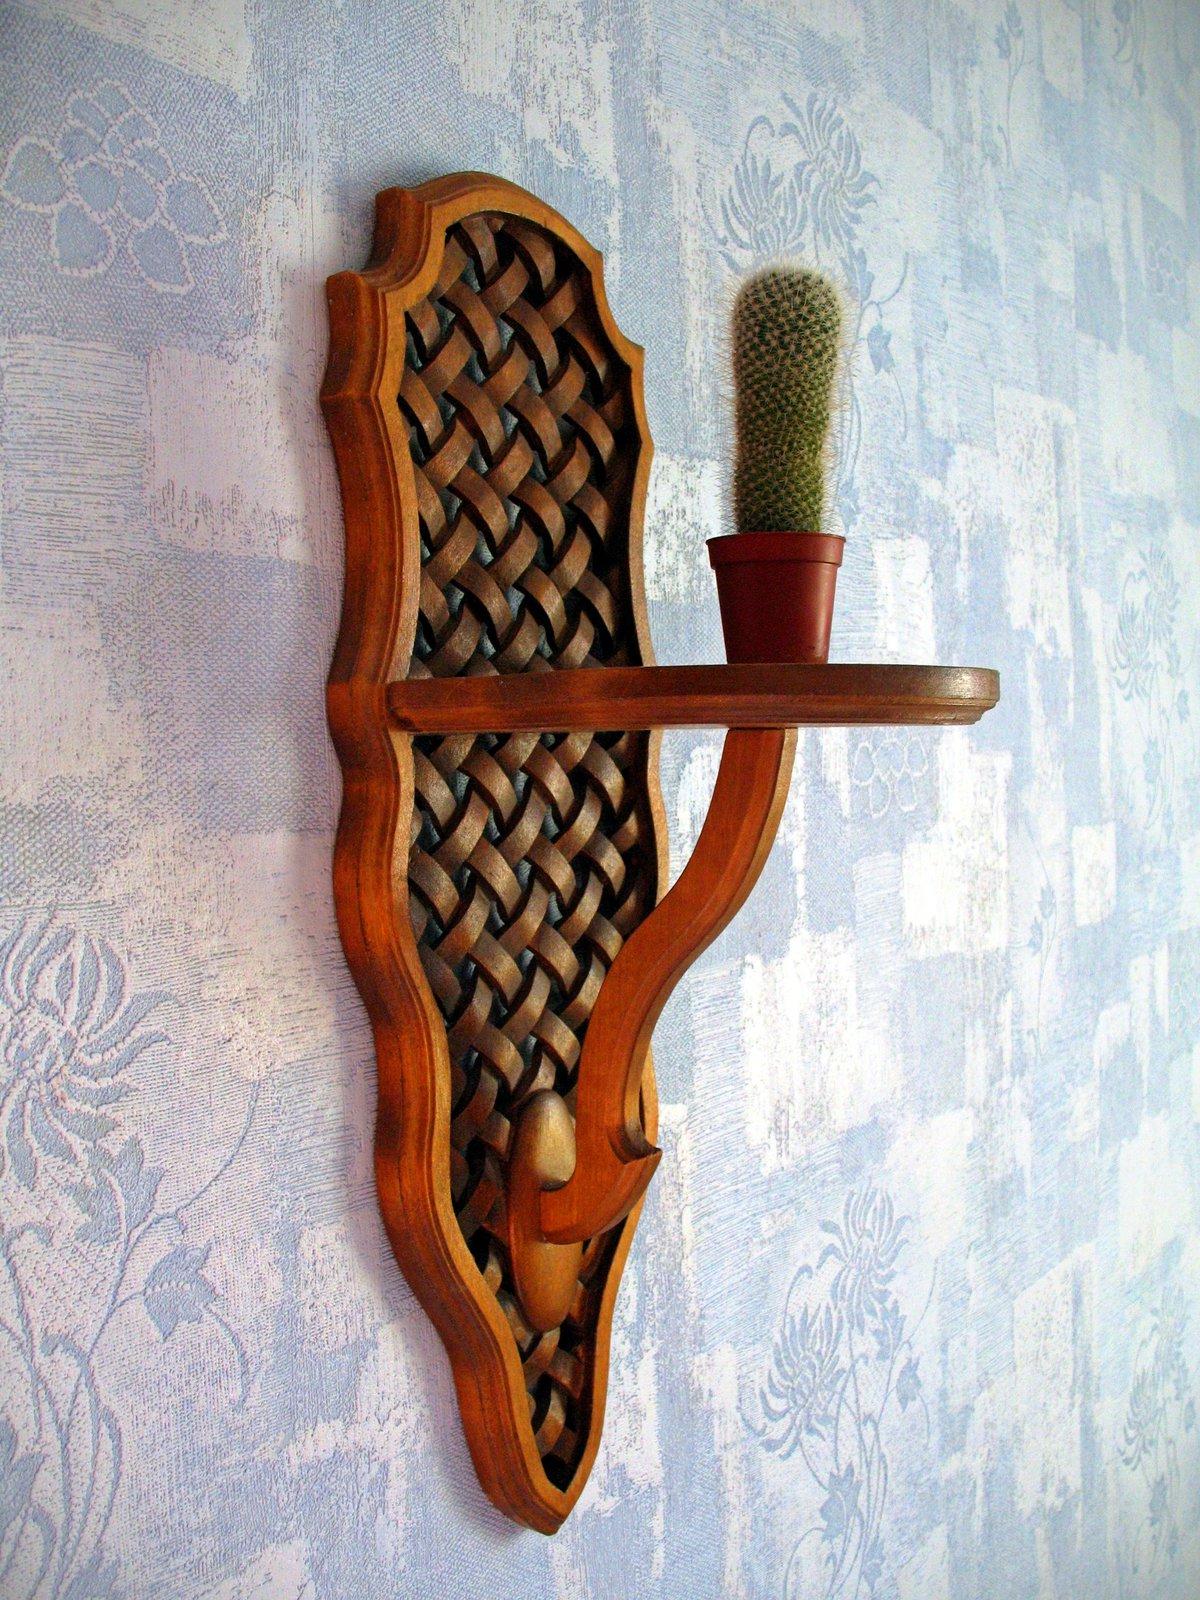 Wooden Plant Stands For Wall